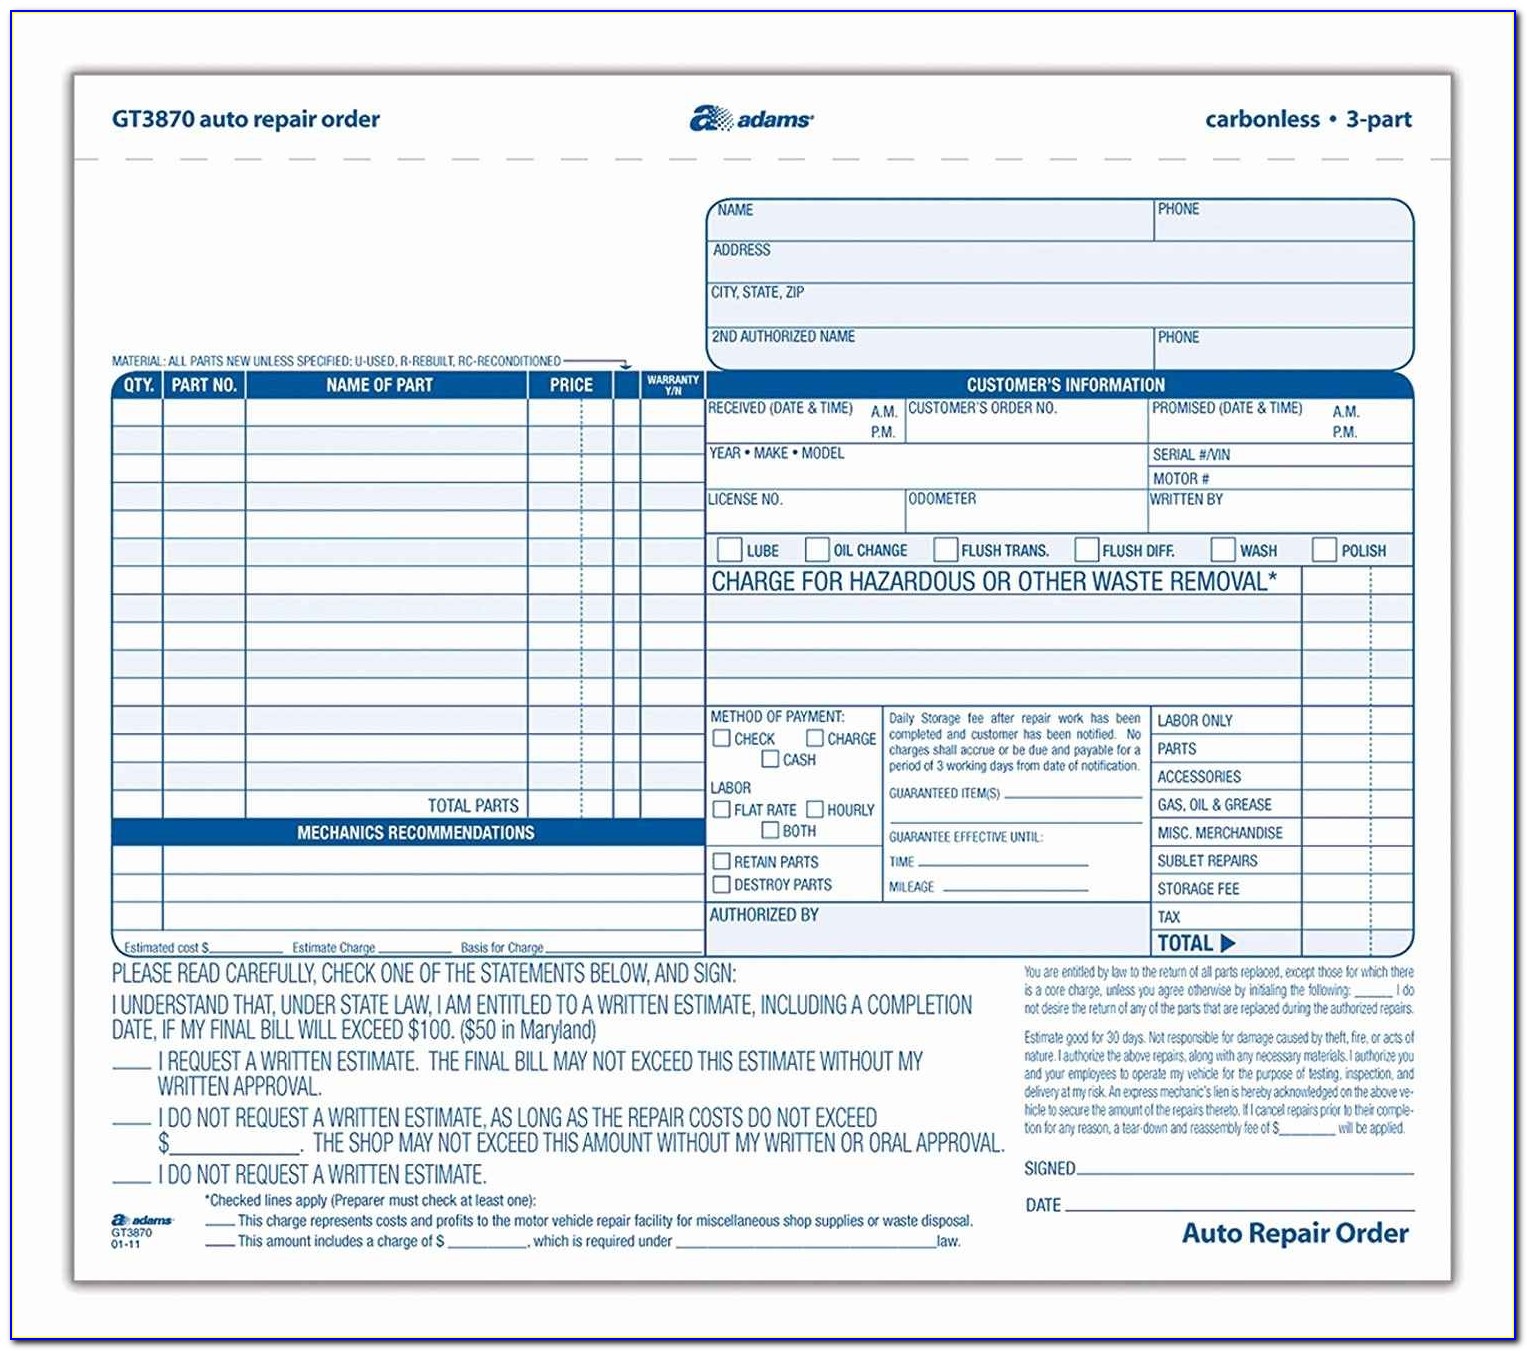 Maintenance Work Order Template Excel As Well As Auto Repair Invoice